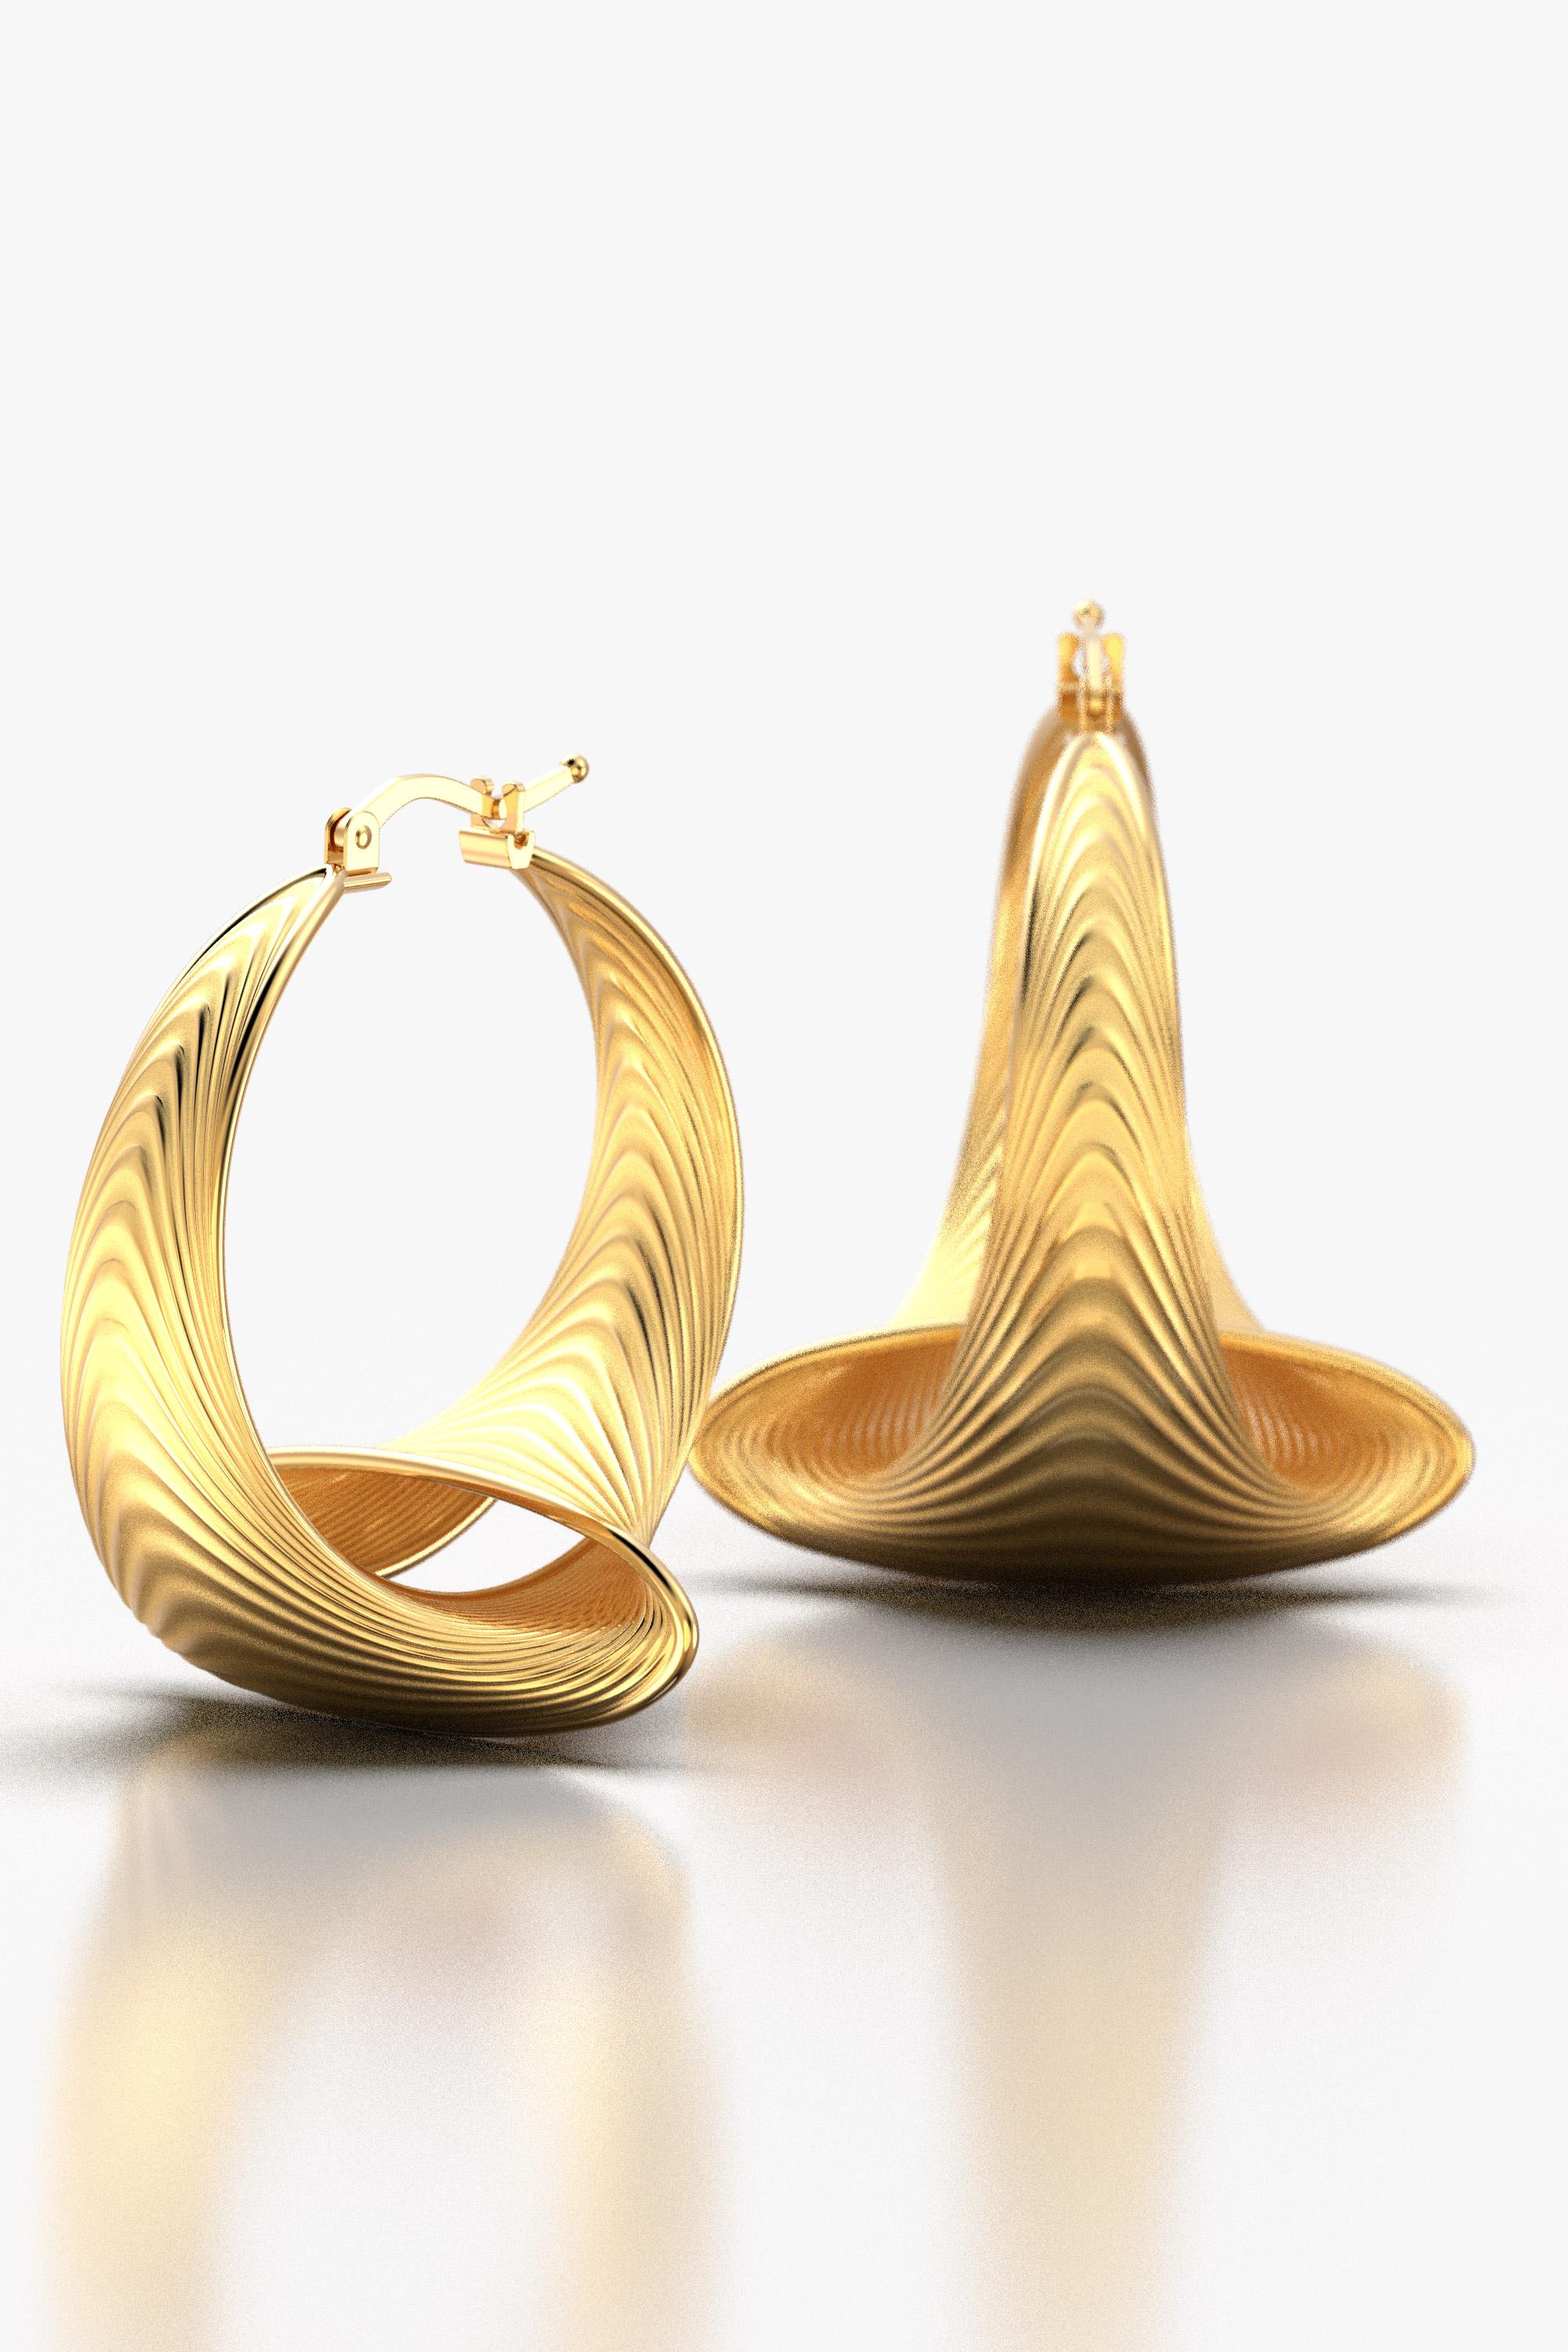 Modern Oltremare Gioielli 18k Gold Hoop Earrings Made in Italy, Italian Gold Jewelry For Sale